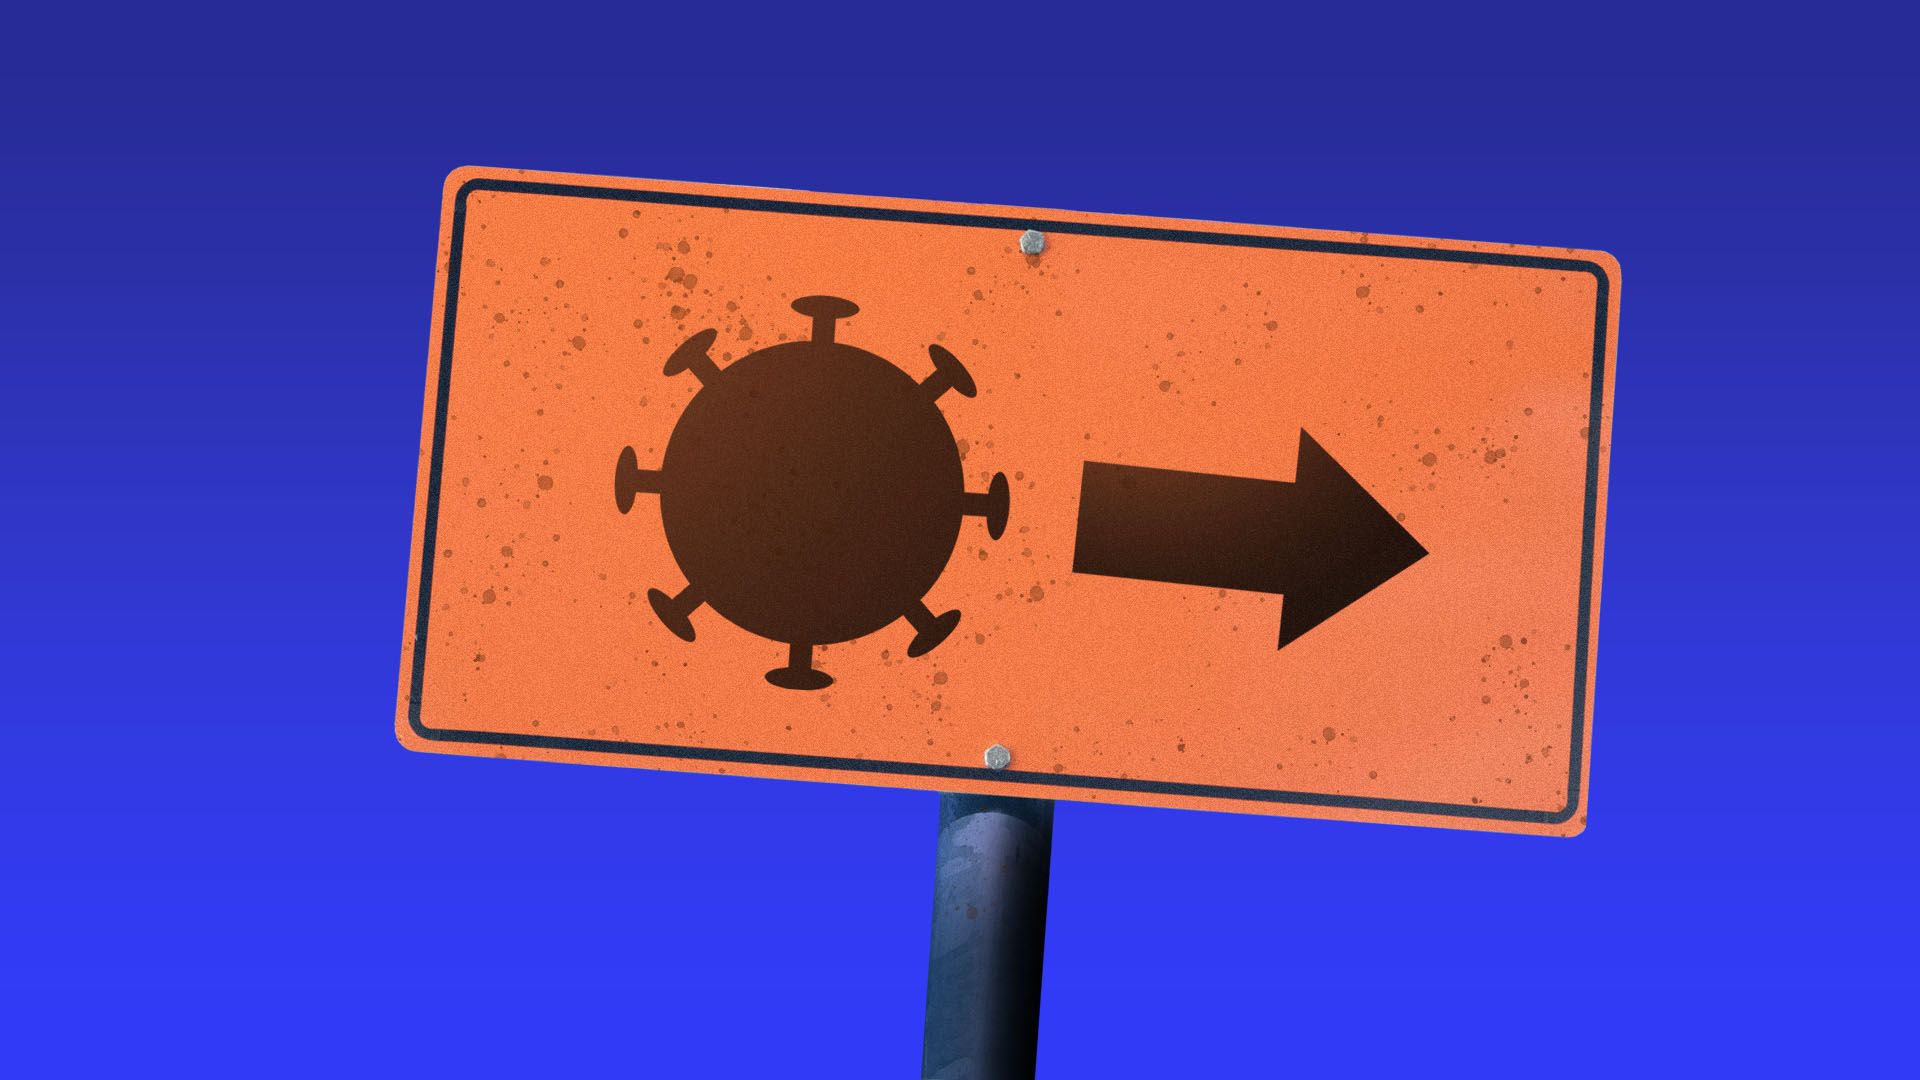 Illustration of a dirty, leaning orange road sign with a virus icon and an arrow